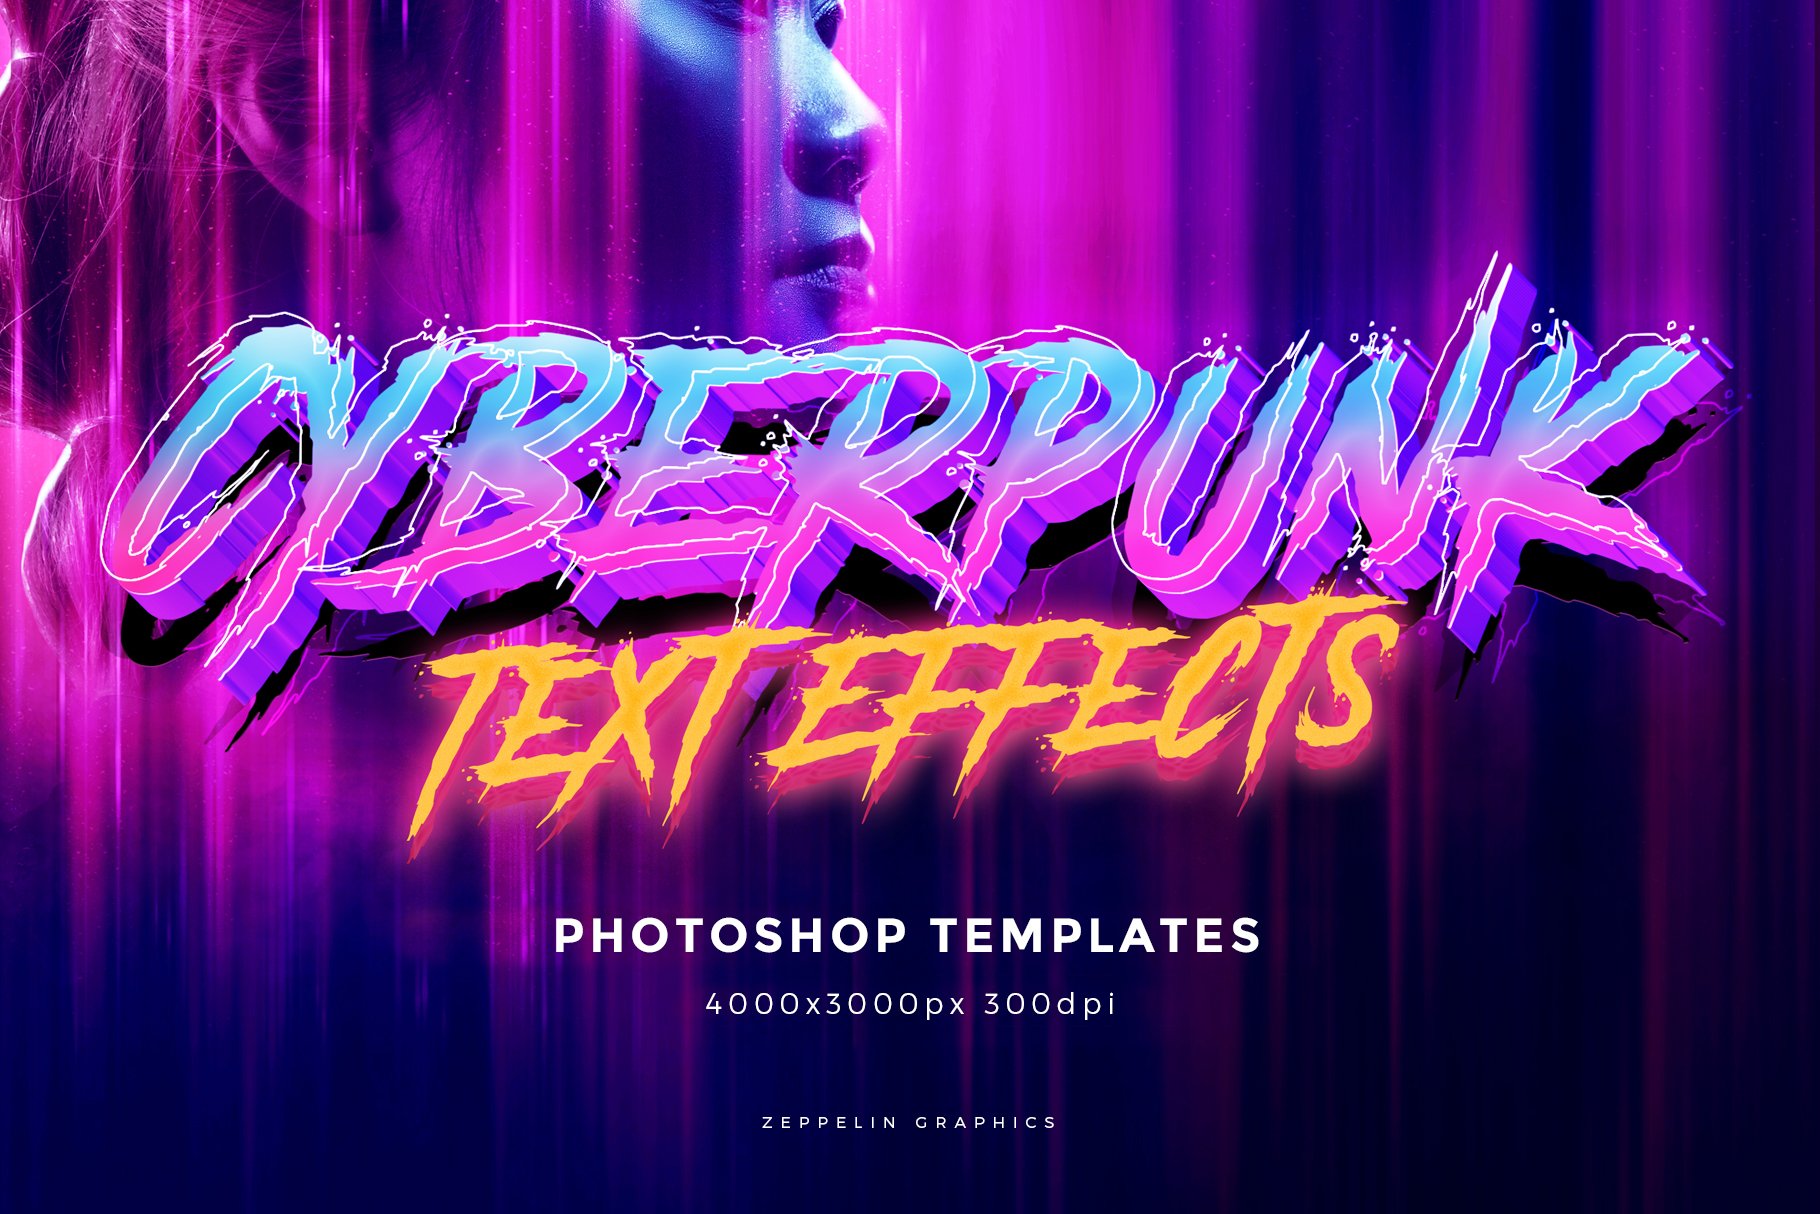 Cyberpunk 80s Text Effectscover image.